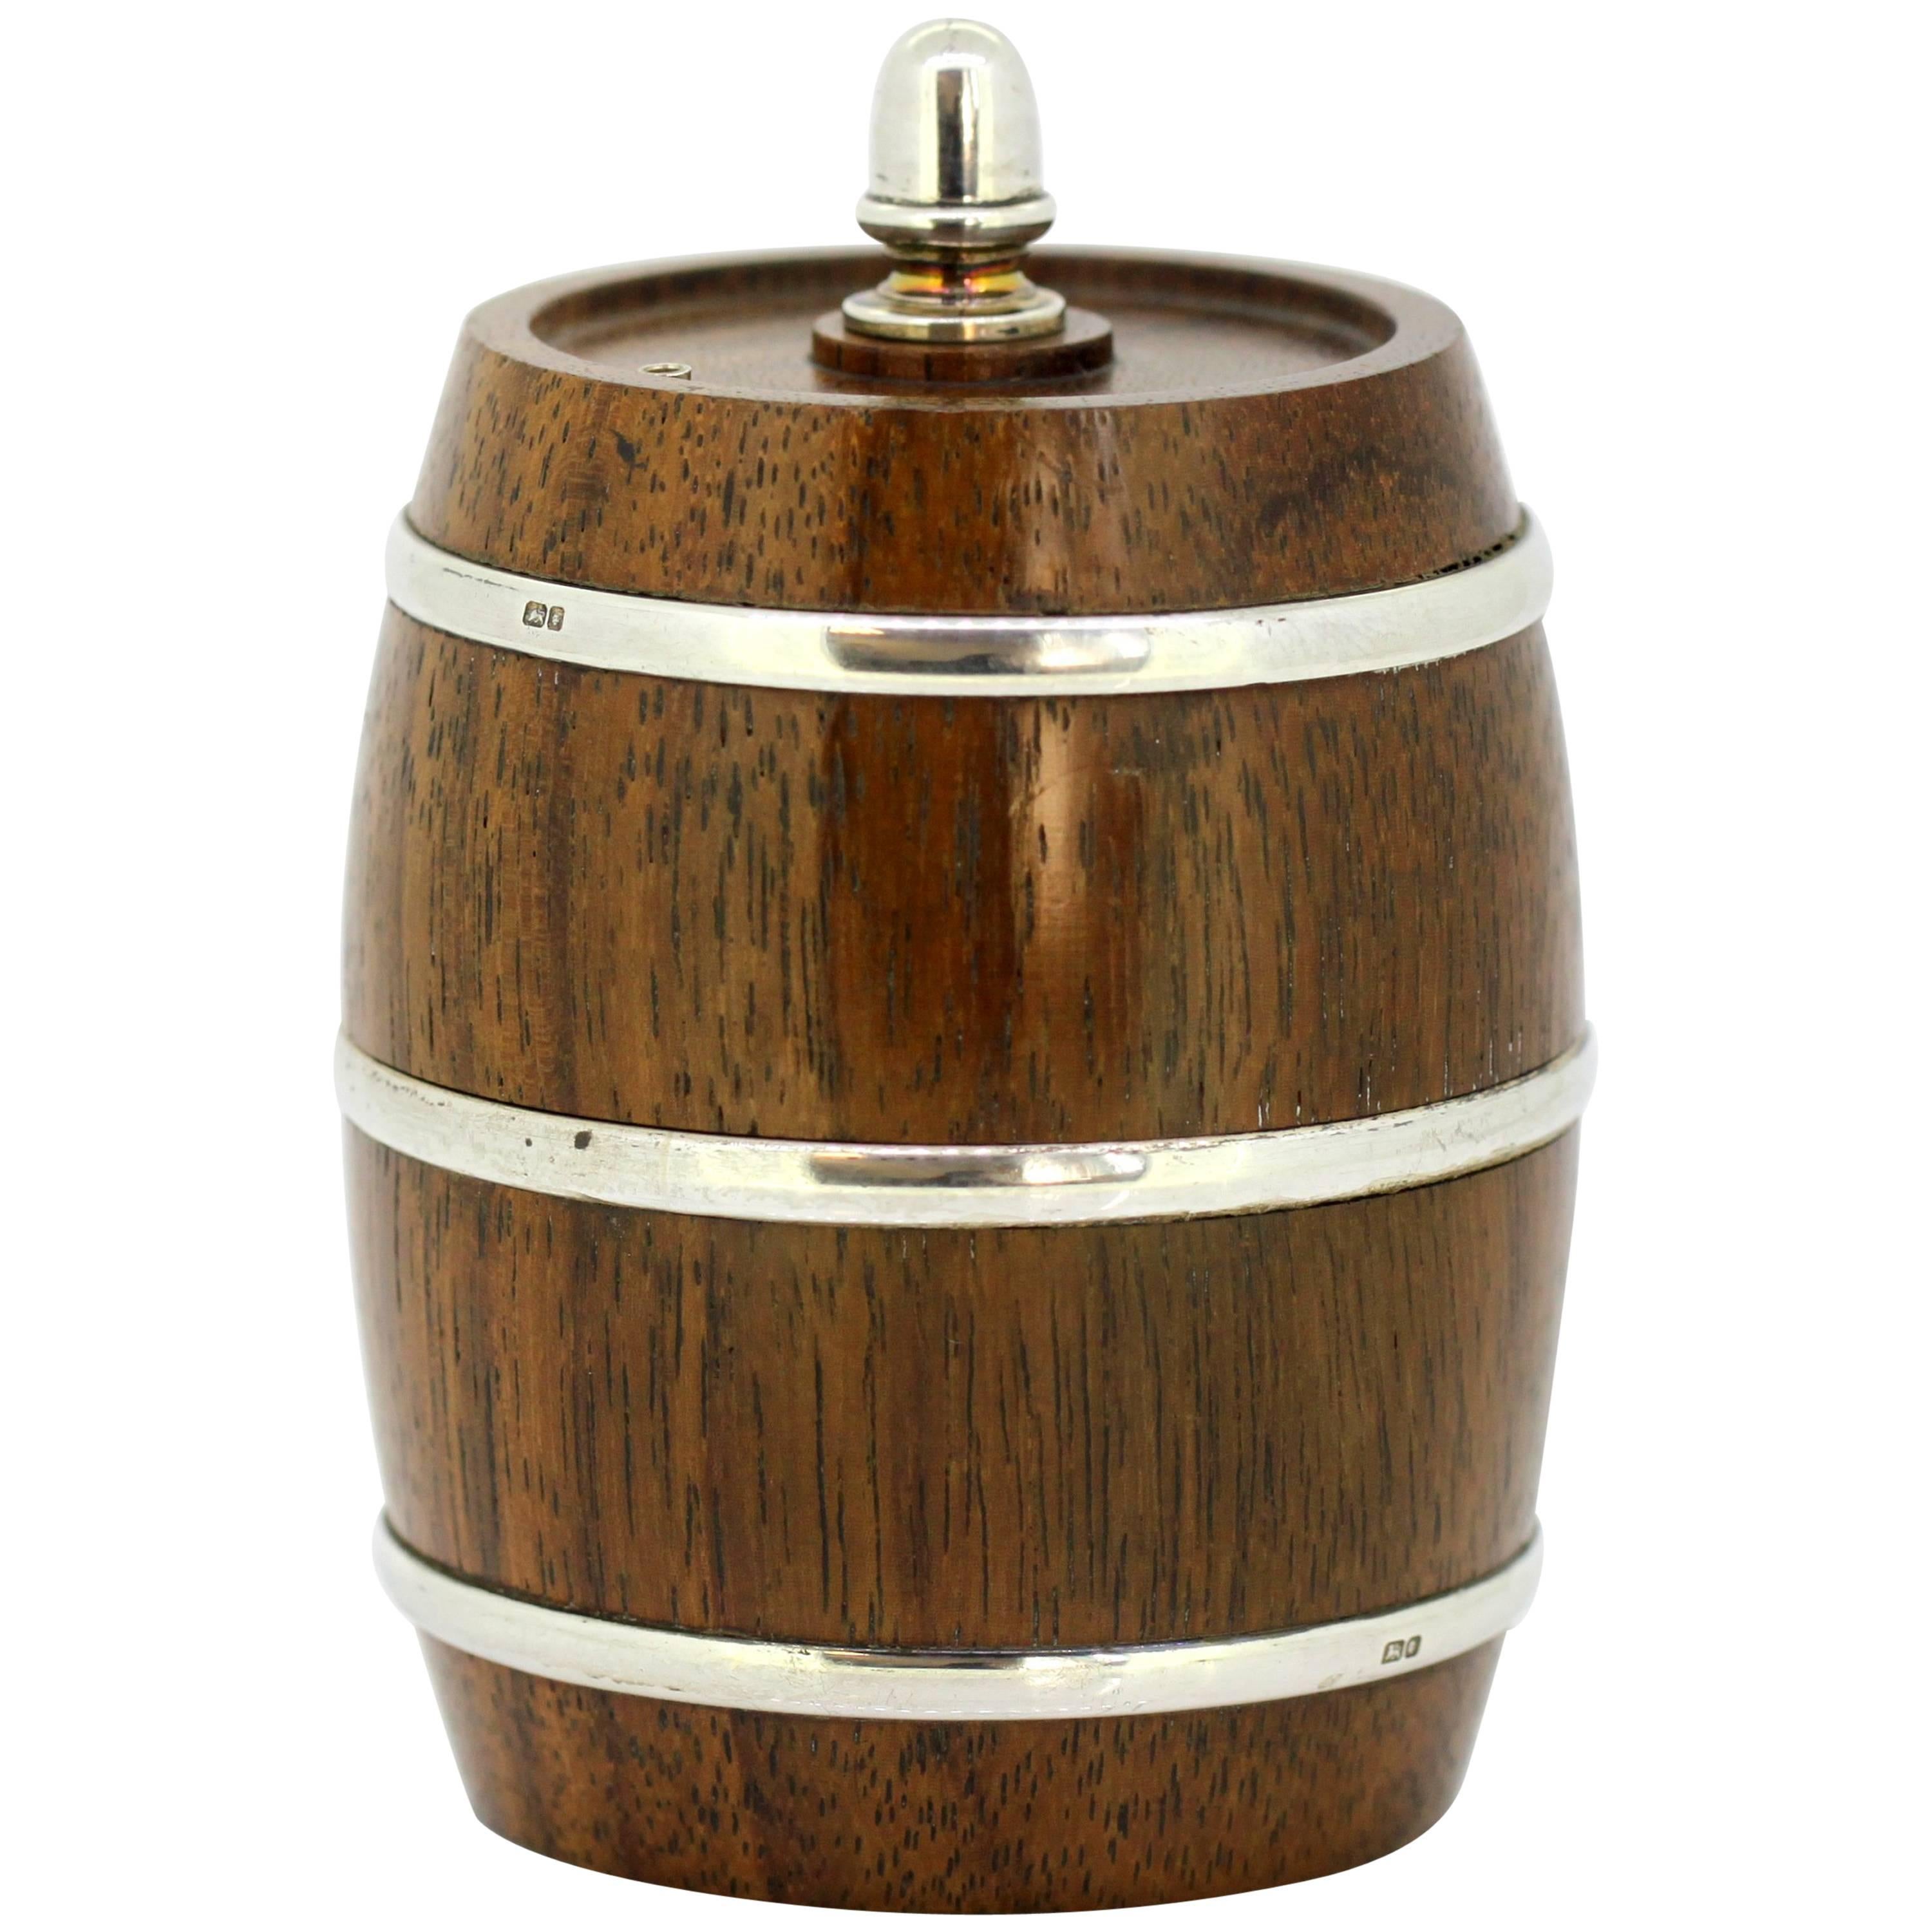 Sterling Silver and Wood Salt Grinder in Form of a Barrel by Mappin & Webb